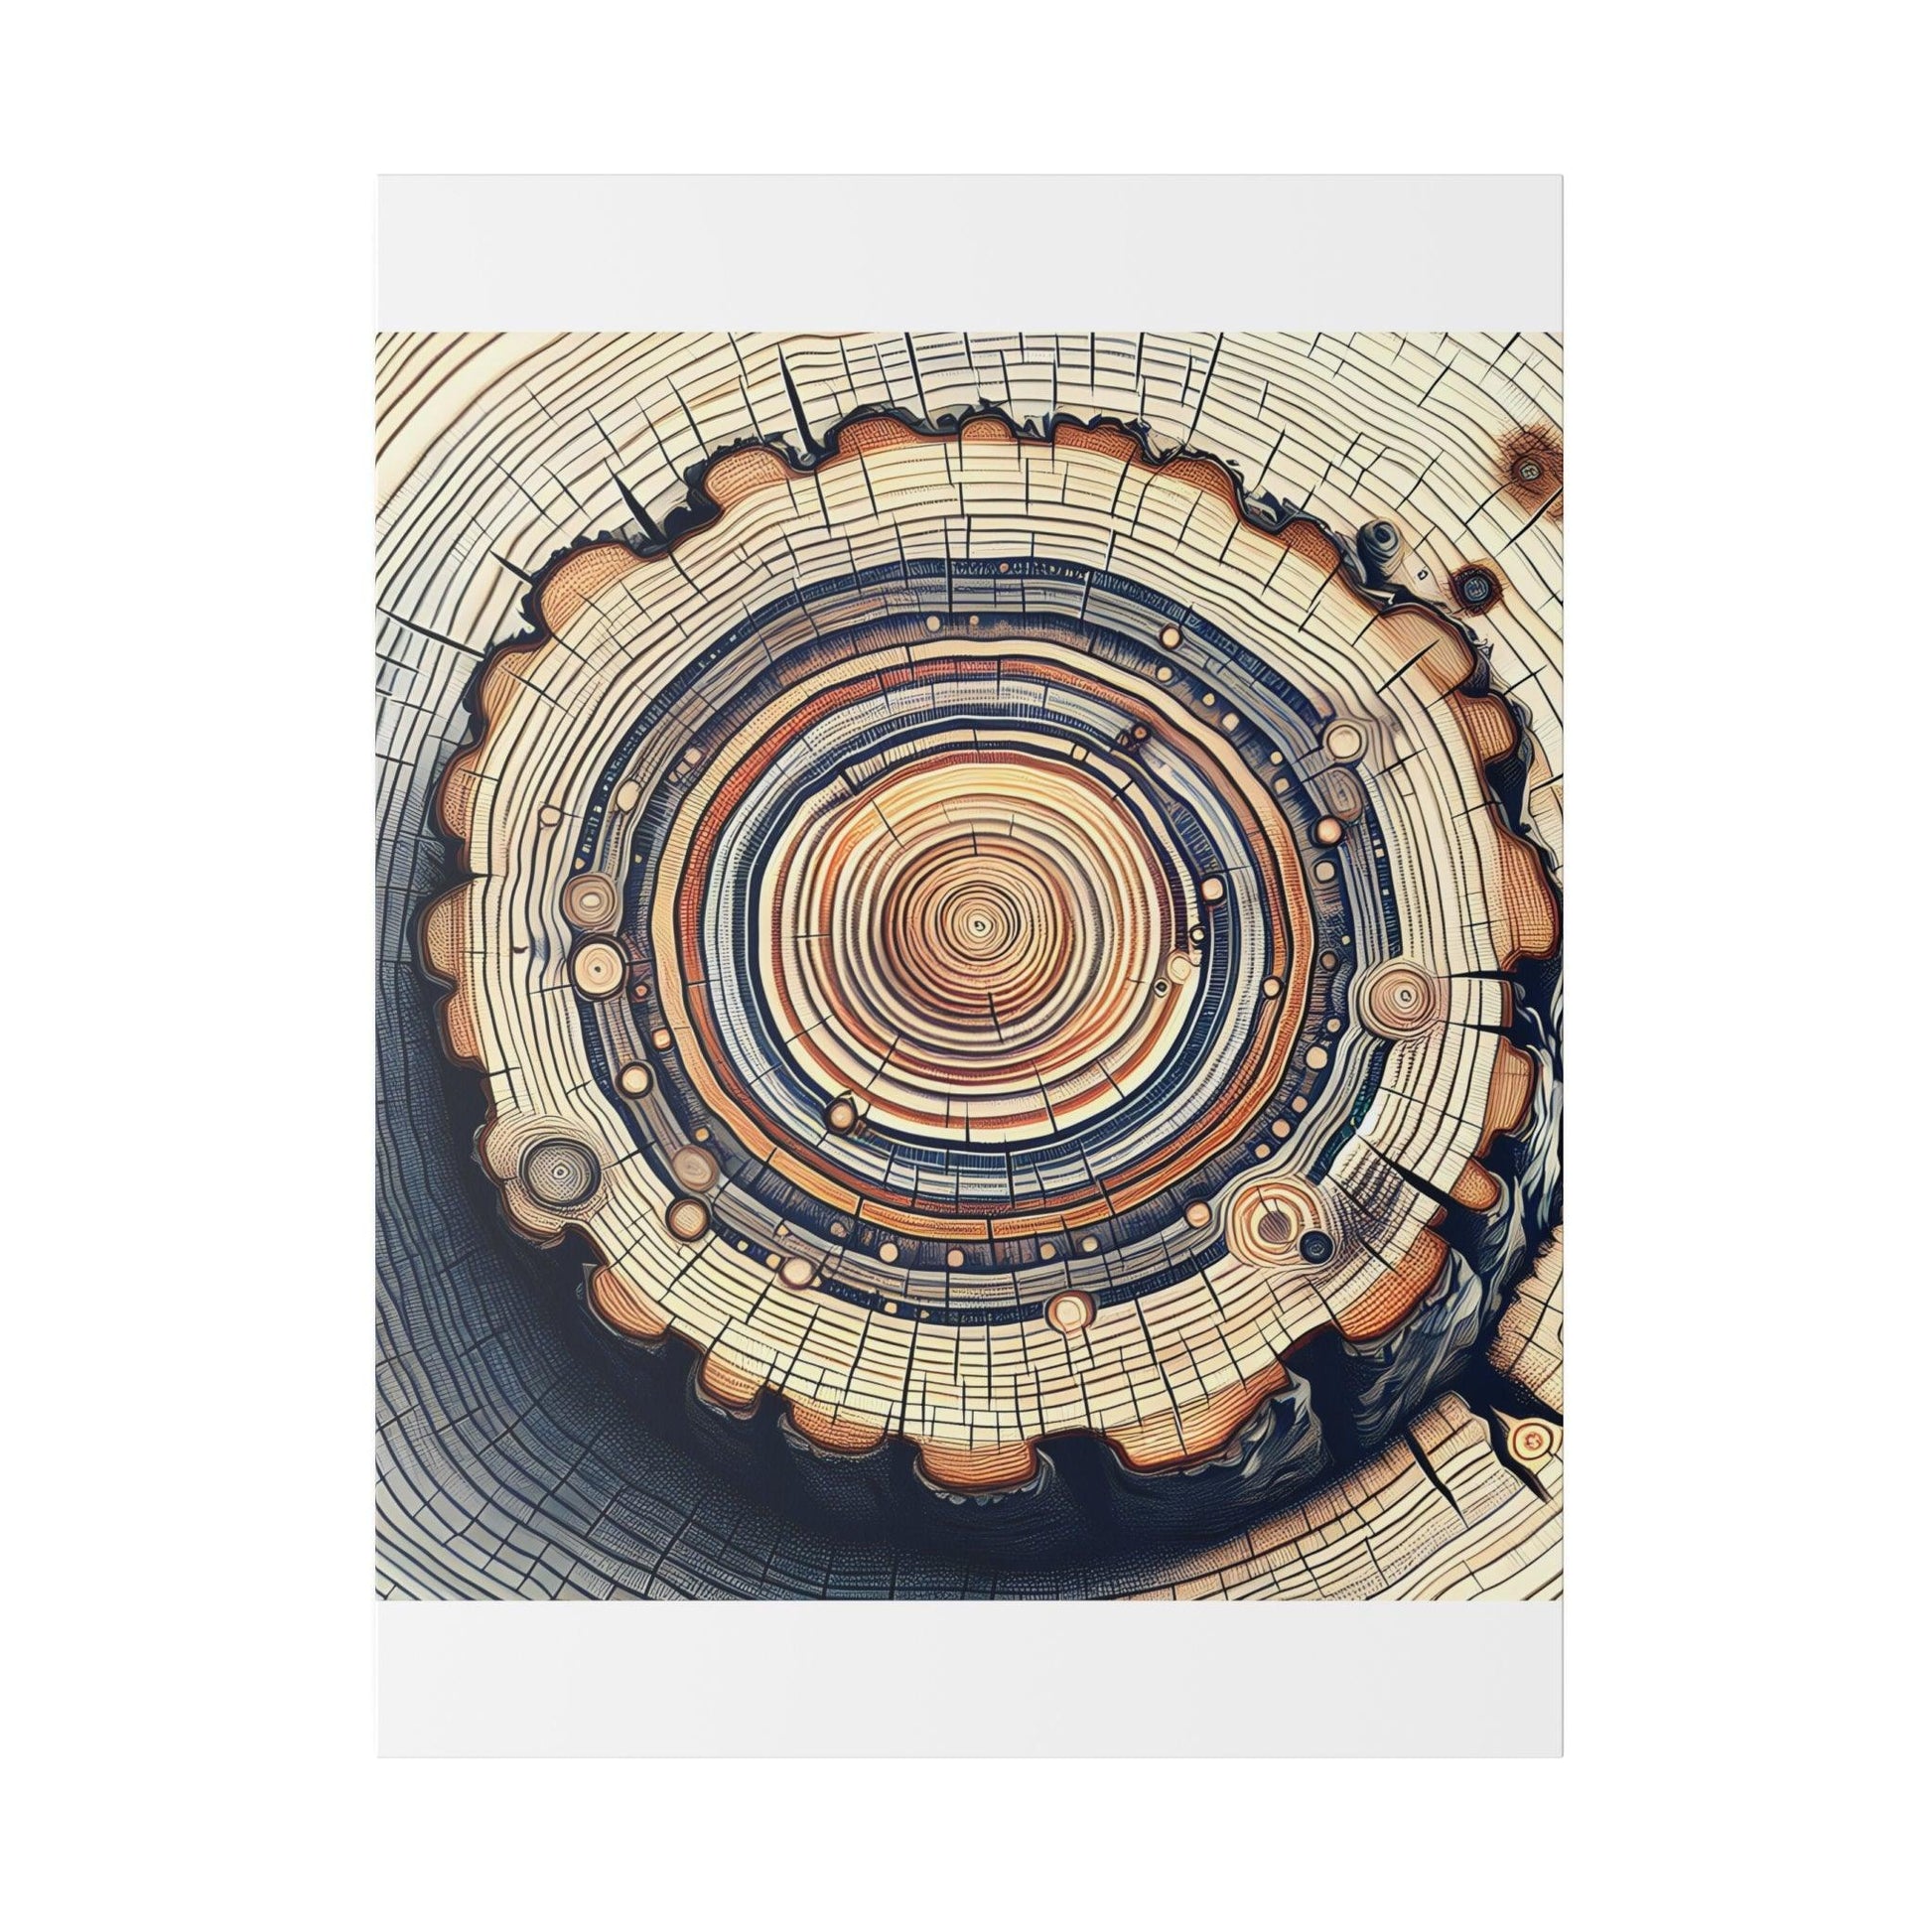 "Arboreal Echo: Tree Ring Canvas Wall Art" - The Alice Gallery